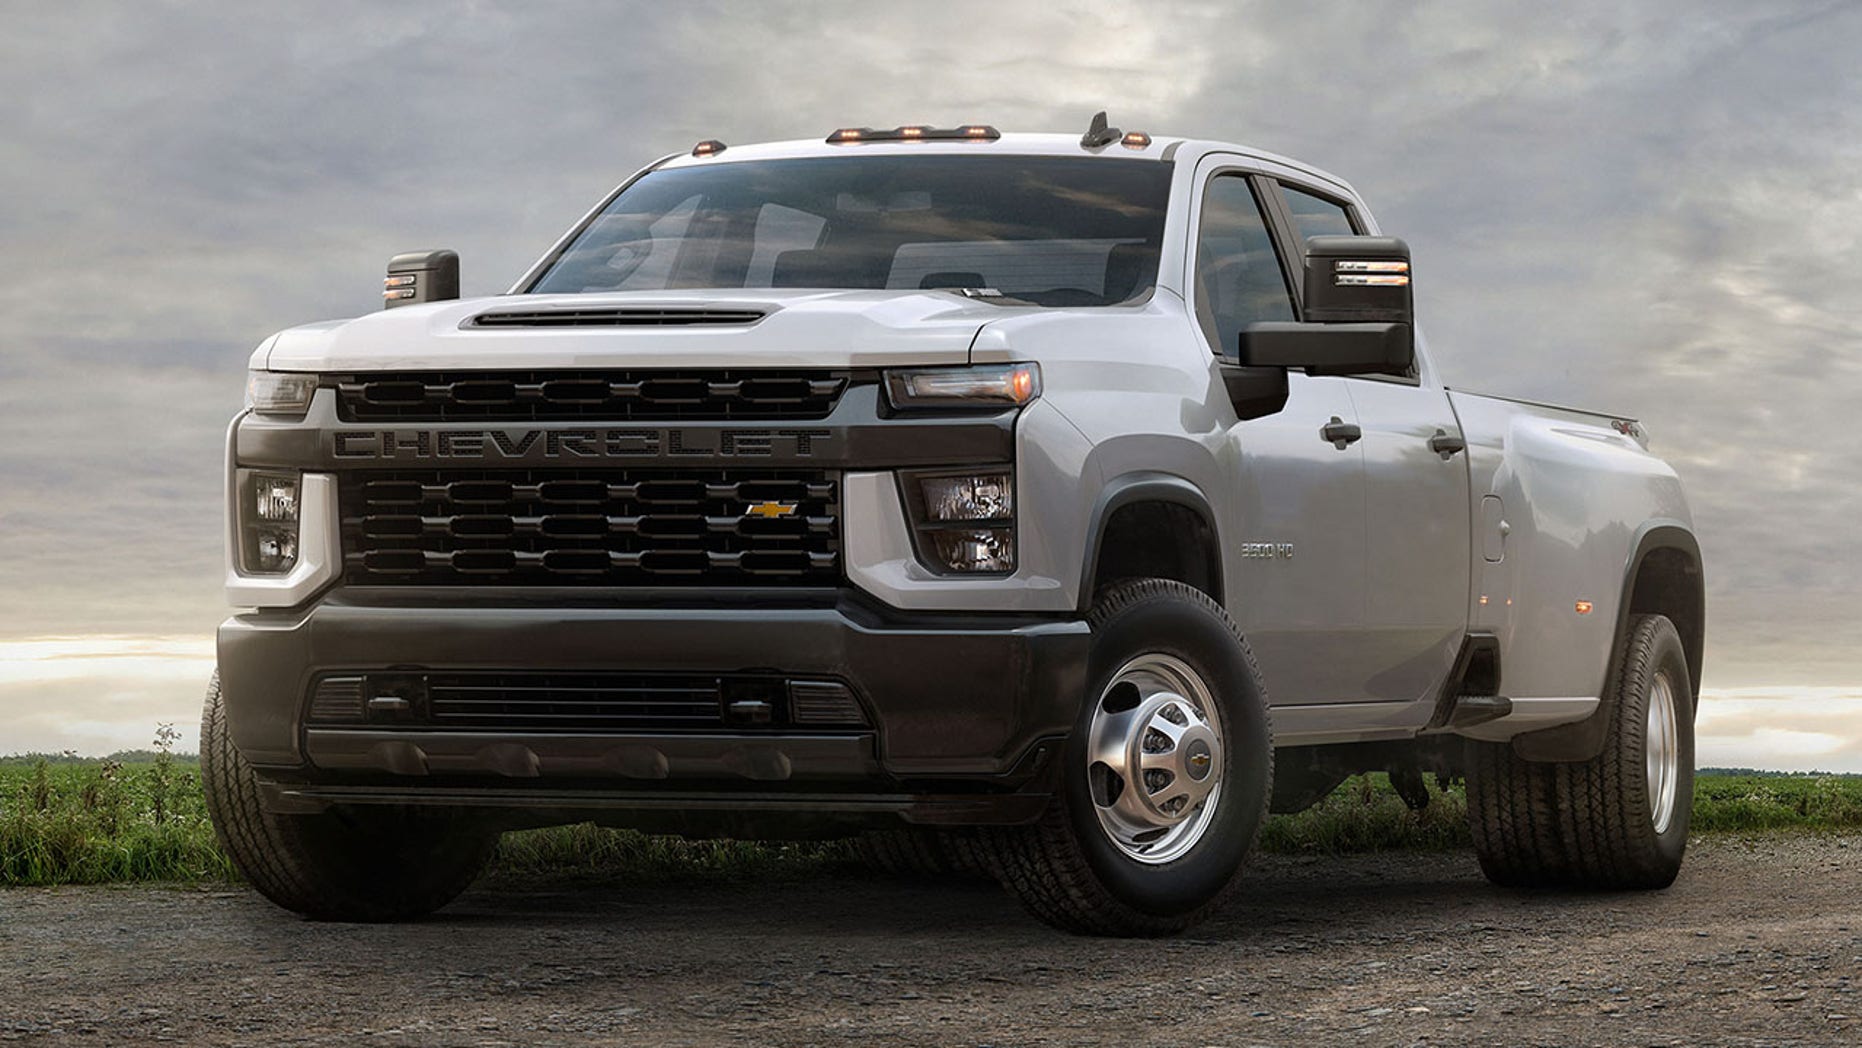 The 2020 Chevrolet Silverado HD is the strongest pickup in America